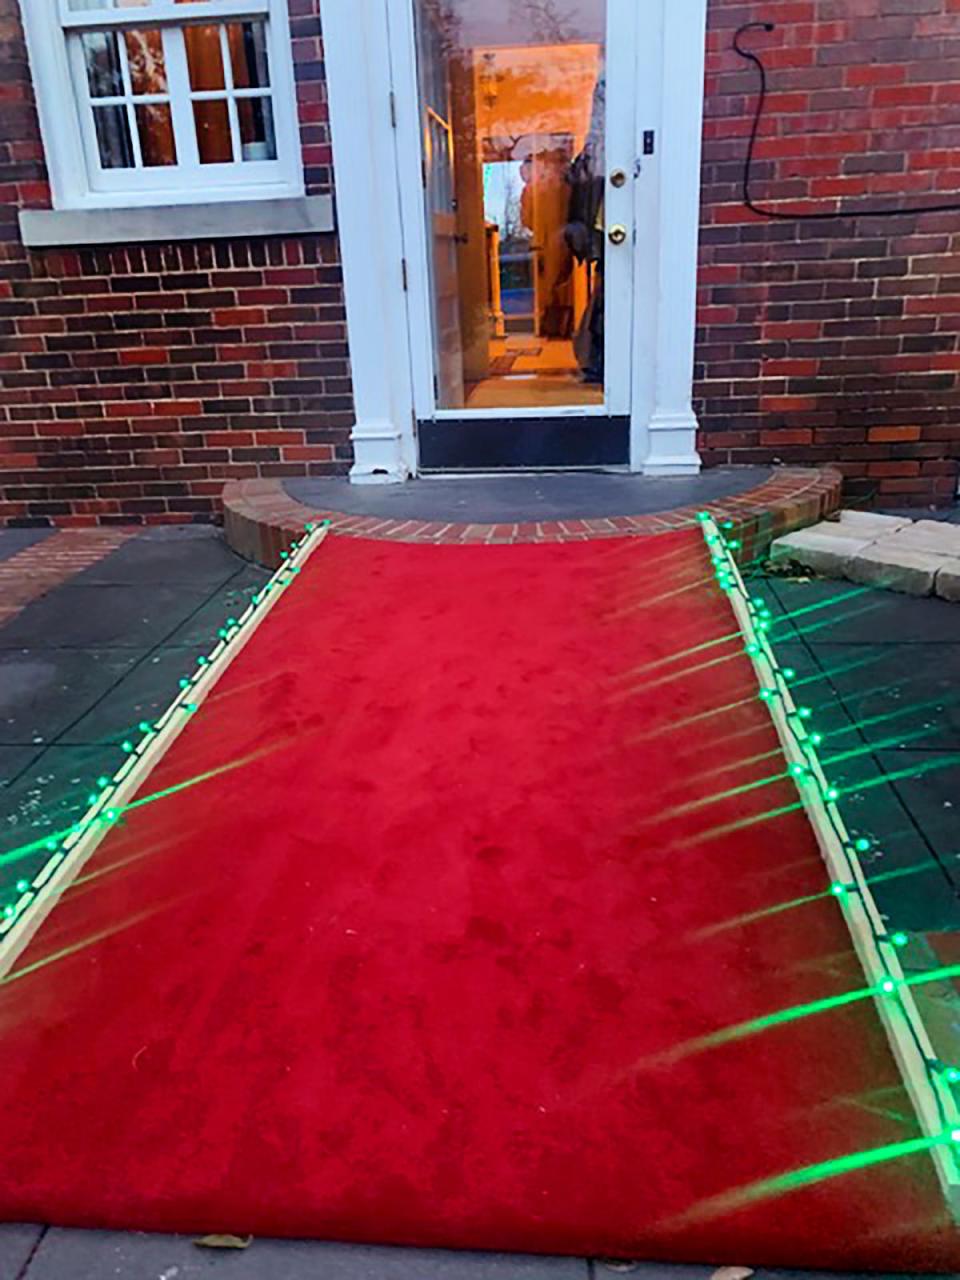  Leslie Rainbolt created a Christmas Eve ramp. The ramp, which led up to her back door, was covered with a red carpet and lined with twinkling green lights.